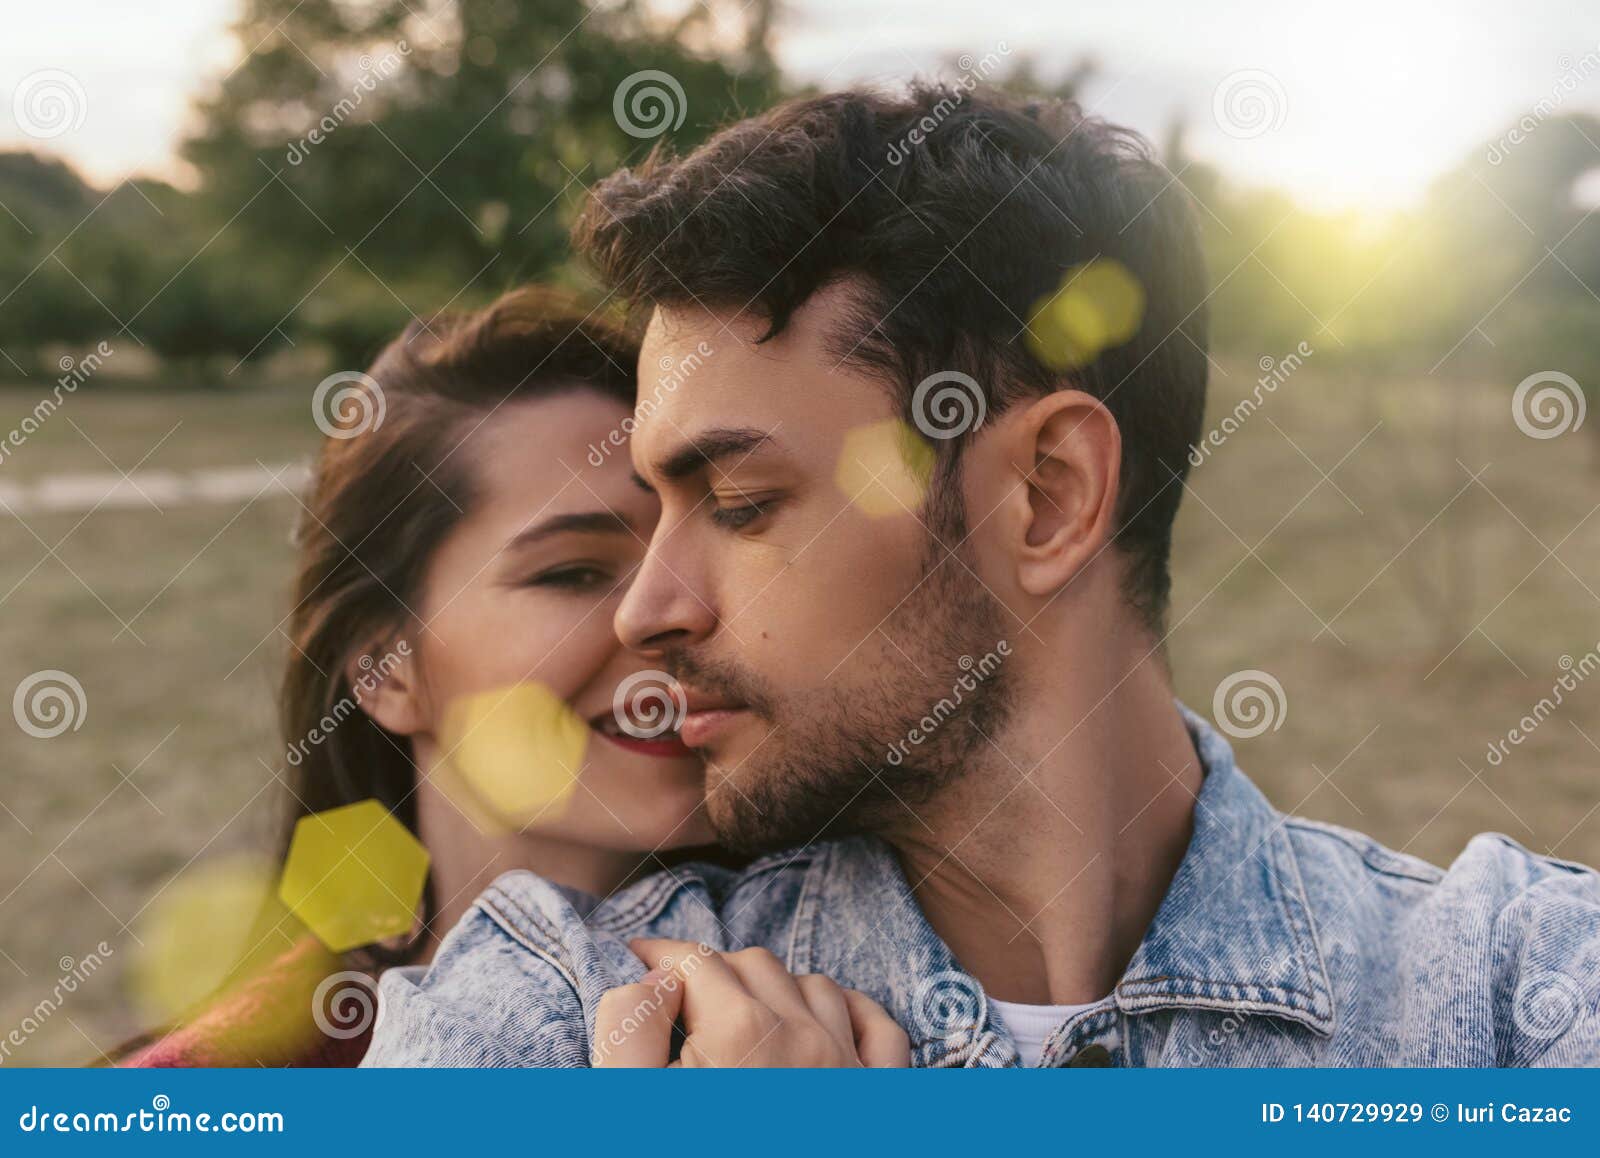 Couple in Love Enjoying Sunshine Embracing Each Other Looking with Love